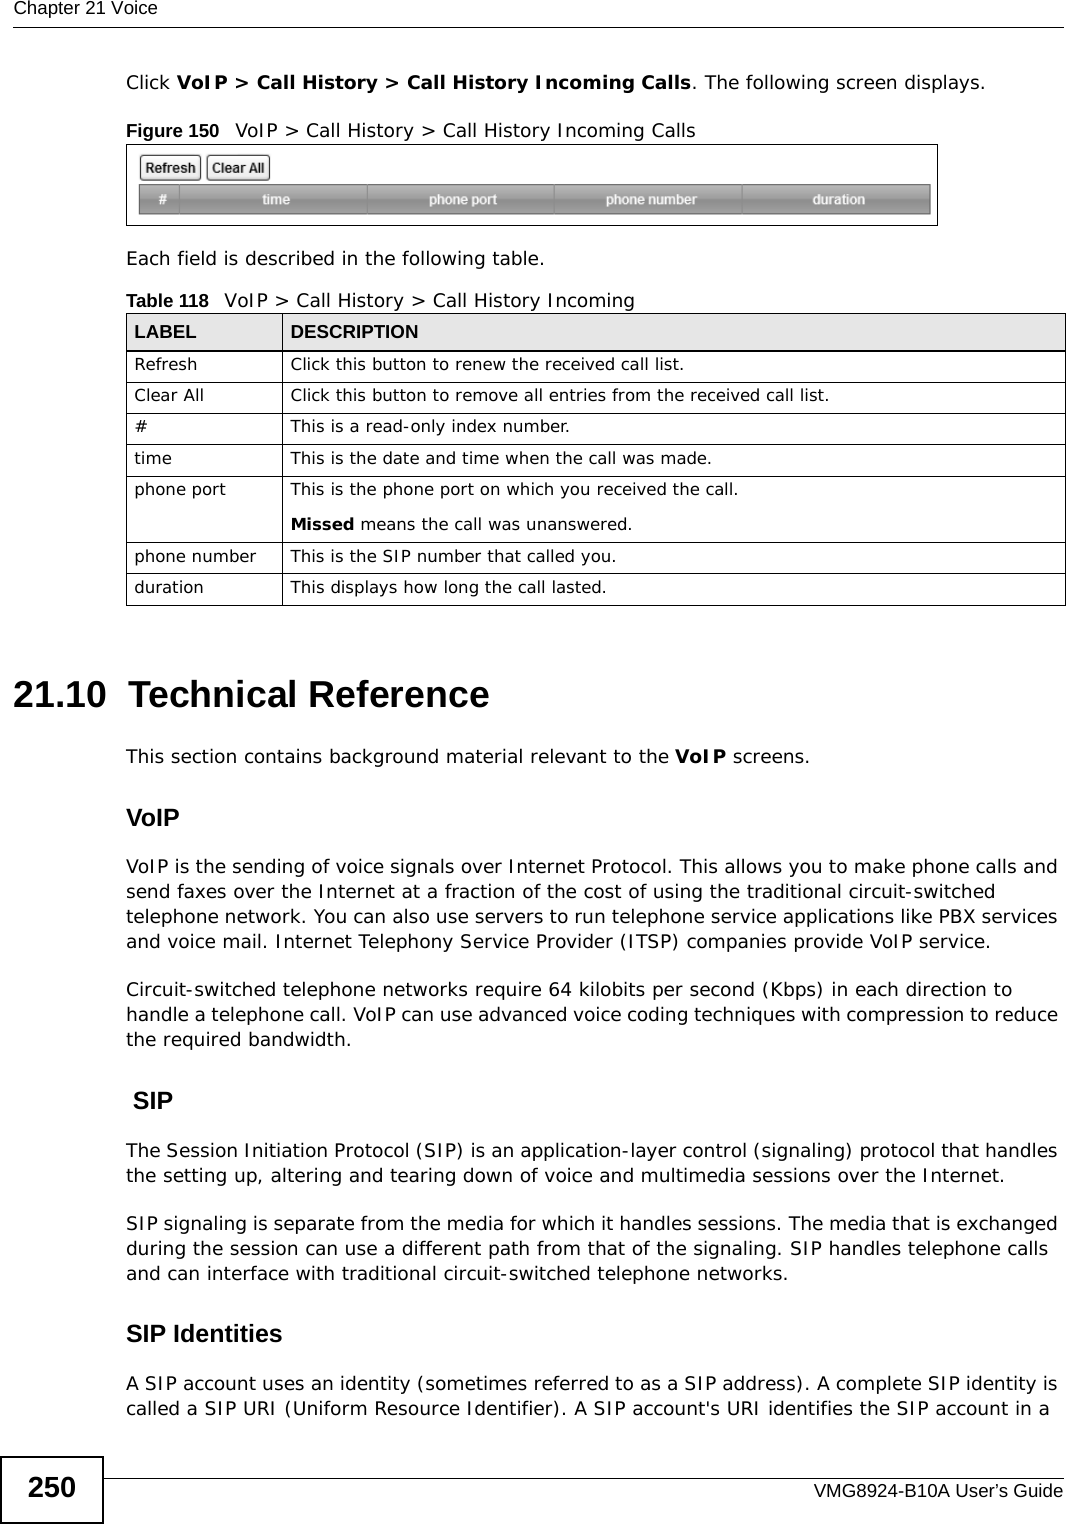 Chapter 21 VoiceVMG8924-B10A User’s Guide250Click VoIP &gt; Call History &gt; Call History Incoming Calls. The following screen displays.Figure 150   VoIP &gt; Call History &gt; Call History Incoming CallsEach field is described in the following table.21.10  Technical ReferenceThis section contains background material relevant to the VoIP screens.VoIP VoIP is the sending of voice signals over Internet Protocol. This allows you to make phone calls and send faxes over the Internet at a fraction of the cost of using the traditional circuit-switched telephone network. You can also use servers to run telephone service applications like PBX services and voice mail. Internet Telephony Service Provider (ITSP) companies provide VoIP service. Circuit-switched telephone networks require 64 kilobits per second (Kbps) in each direction to handle a telephone call. VoIP can use advanced voice coding techniques with compression to reduce the required bandwidth.  SIPThe Session Initiation Protocol (SIP) is an application-layer control (signaling) protocol that handles the setting up, altering and tearing down of voice and multimedia sessions over the Internet.SIP signaling is separate from the media for which it handles sessions. The media that is exchanged during the session can use a different path from that of the signaling. SIP handles telephone calls and can interface with traditional circuit-switched telephone networks.SIP IdentitiesA SIP account uses an identity (sometimes referred to as a SIP address). A complete SIP identity is called a SIP URI (Uniform Resource Identifier). A SIP account&apos;s URI identifies the SIP account in a Table 118   VoIP &gt; Call History &gt; Call History IncomingLABEL DESCRIPTIONRefresh Click this button to renew the received call list.Clear All Click this button to remove all entries from the received call list.#This is a read-only index number.time This is the date and time when the call was made.phone port This is the phone port on which you received the call.Missed means the call was unanswered.phone number This is the SIP number that called you.duration This displays how long the call lasted.